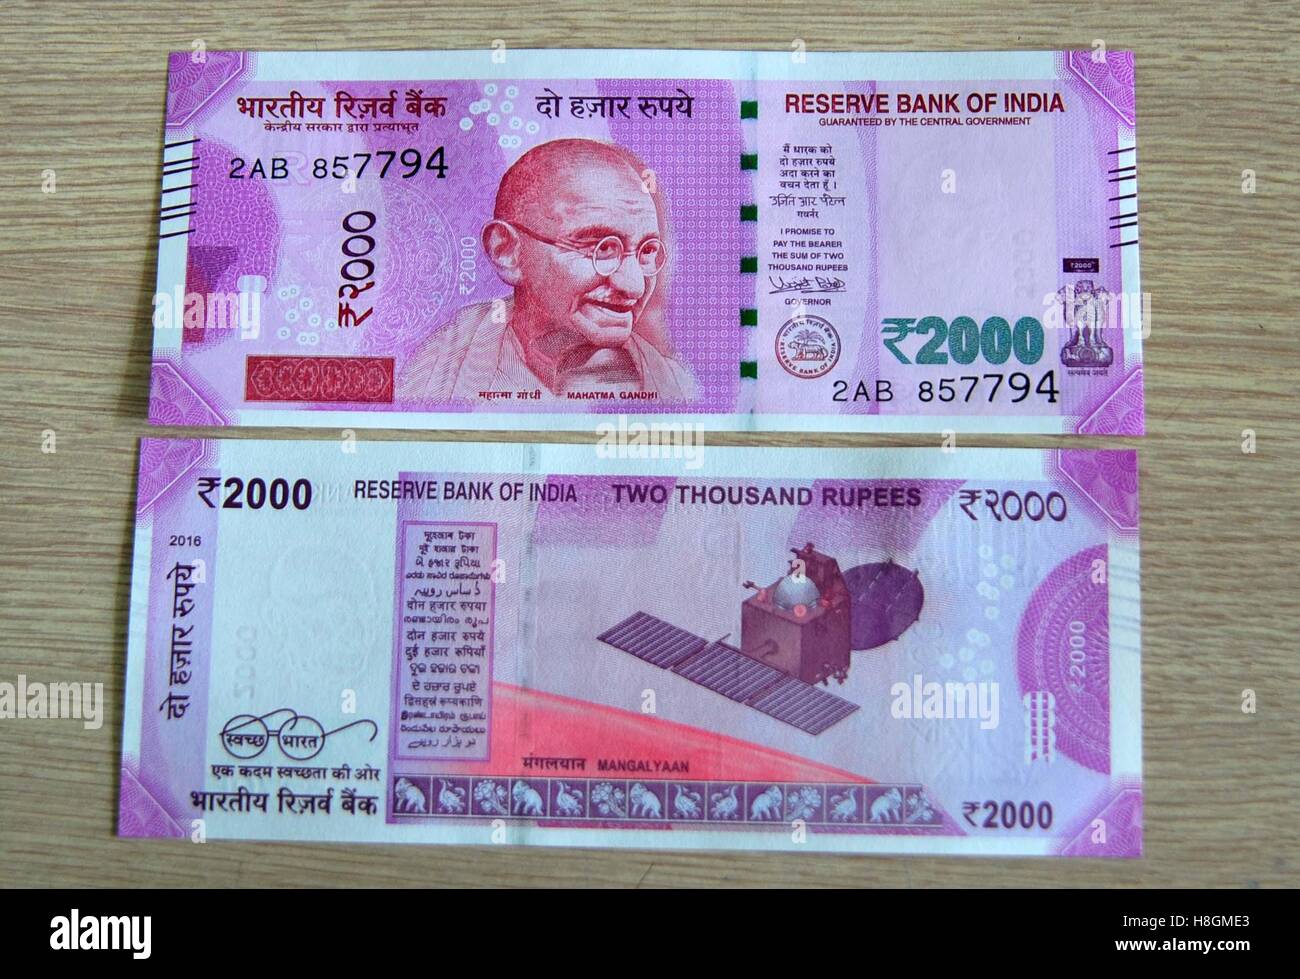 Allahabad, uttar pradesh, India. 12th Nov, 2016. Allahabad: A view of newly launched 2000 rupee currency notes in Allahabad on 12-11-2016. photo by prabhat kumar verma Credit:  Prabhat Kumar Verma/ZUMA Wire/Alamy Live News Stock Photo